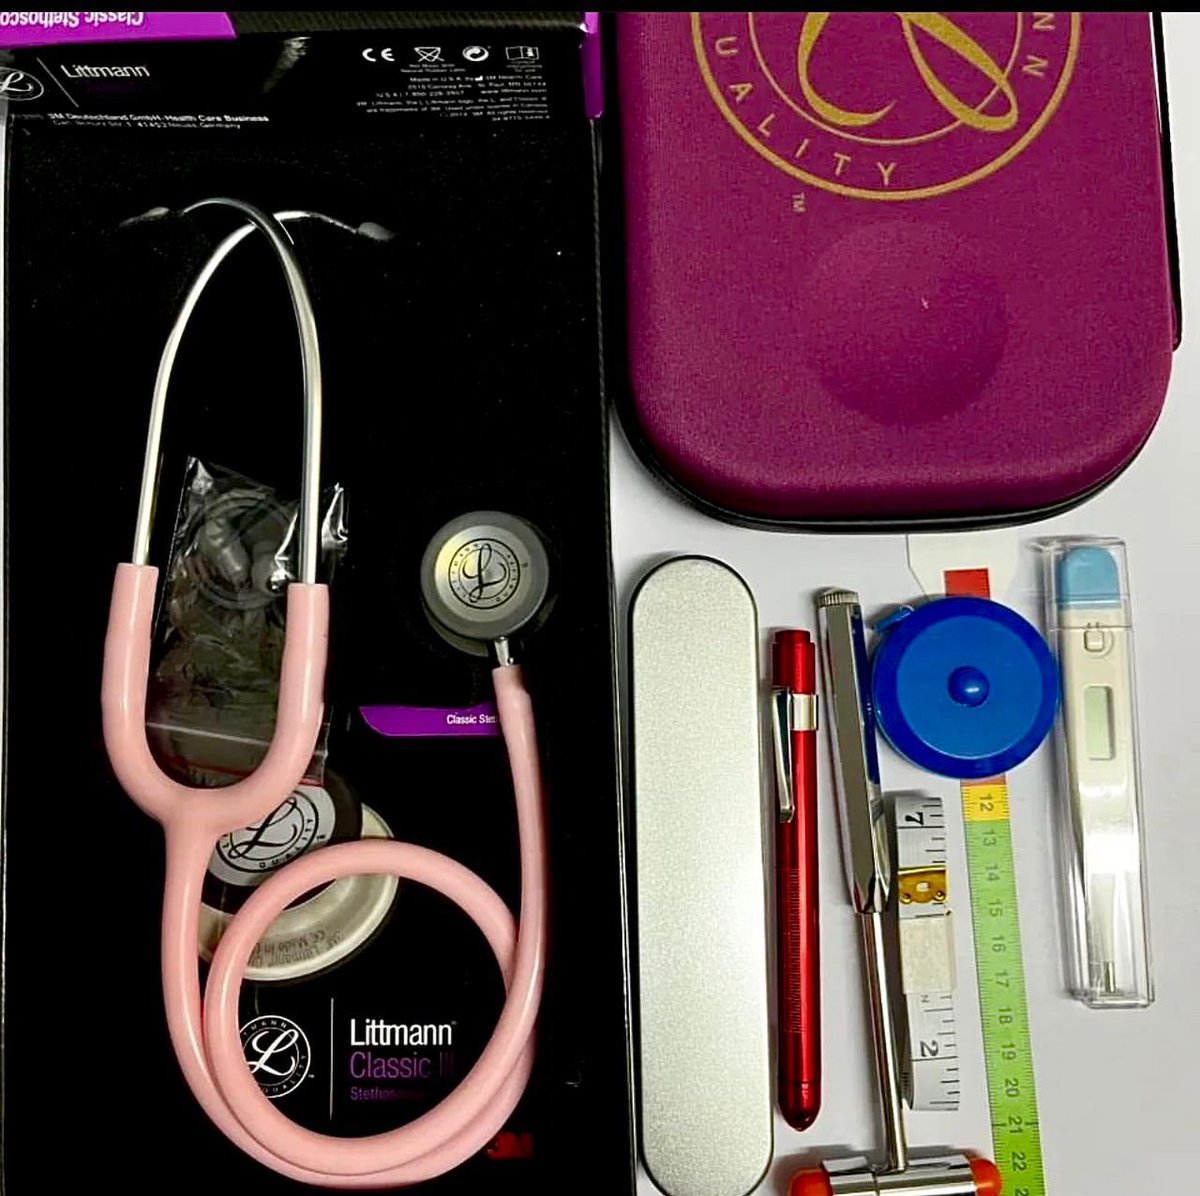 🔥 Scrubs Kampala 🔥 Don't miss out on discounts for scrubs, clinical coats, stethoscopes, and more! 🌟 Classic II Littmann Stethoscopes at 130,000 UGX, Classic III at 210,000 UGX – all originals, no fakes! 1️⃣ Basic - 170,000 UGX - Simple Stethoscope - ⁠Stethoscope Case -…